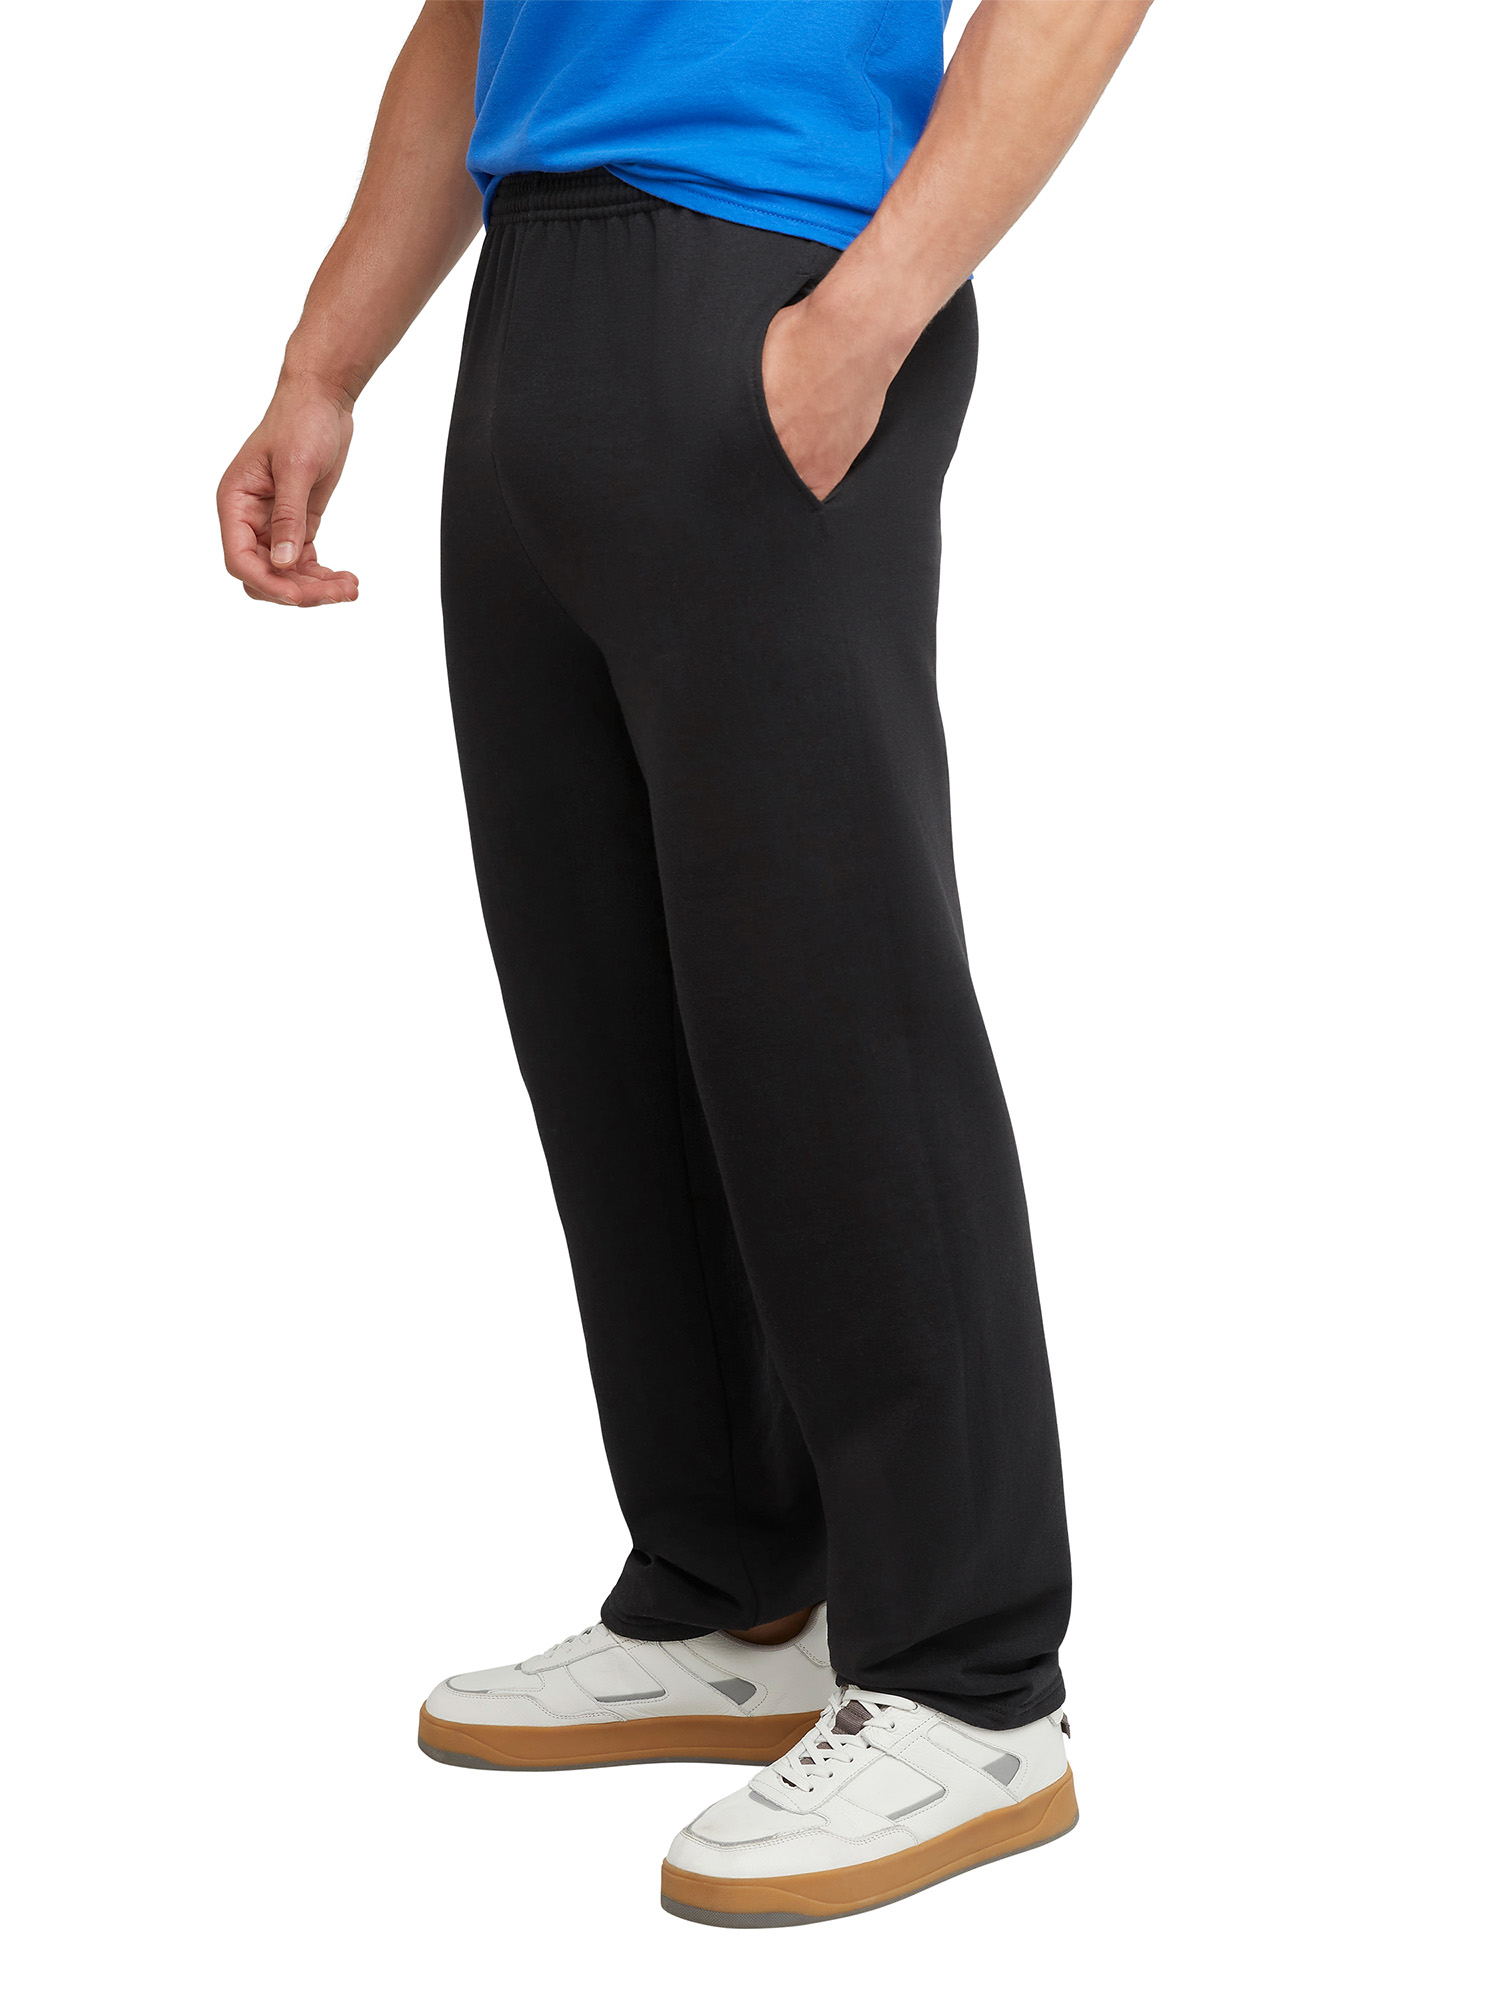 Hanes Men's and Big Men's EcoSmart Fleece Sweatpants with Pockets, up to Sizes 3XL - image 4 of 7